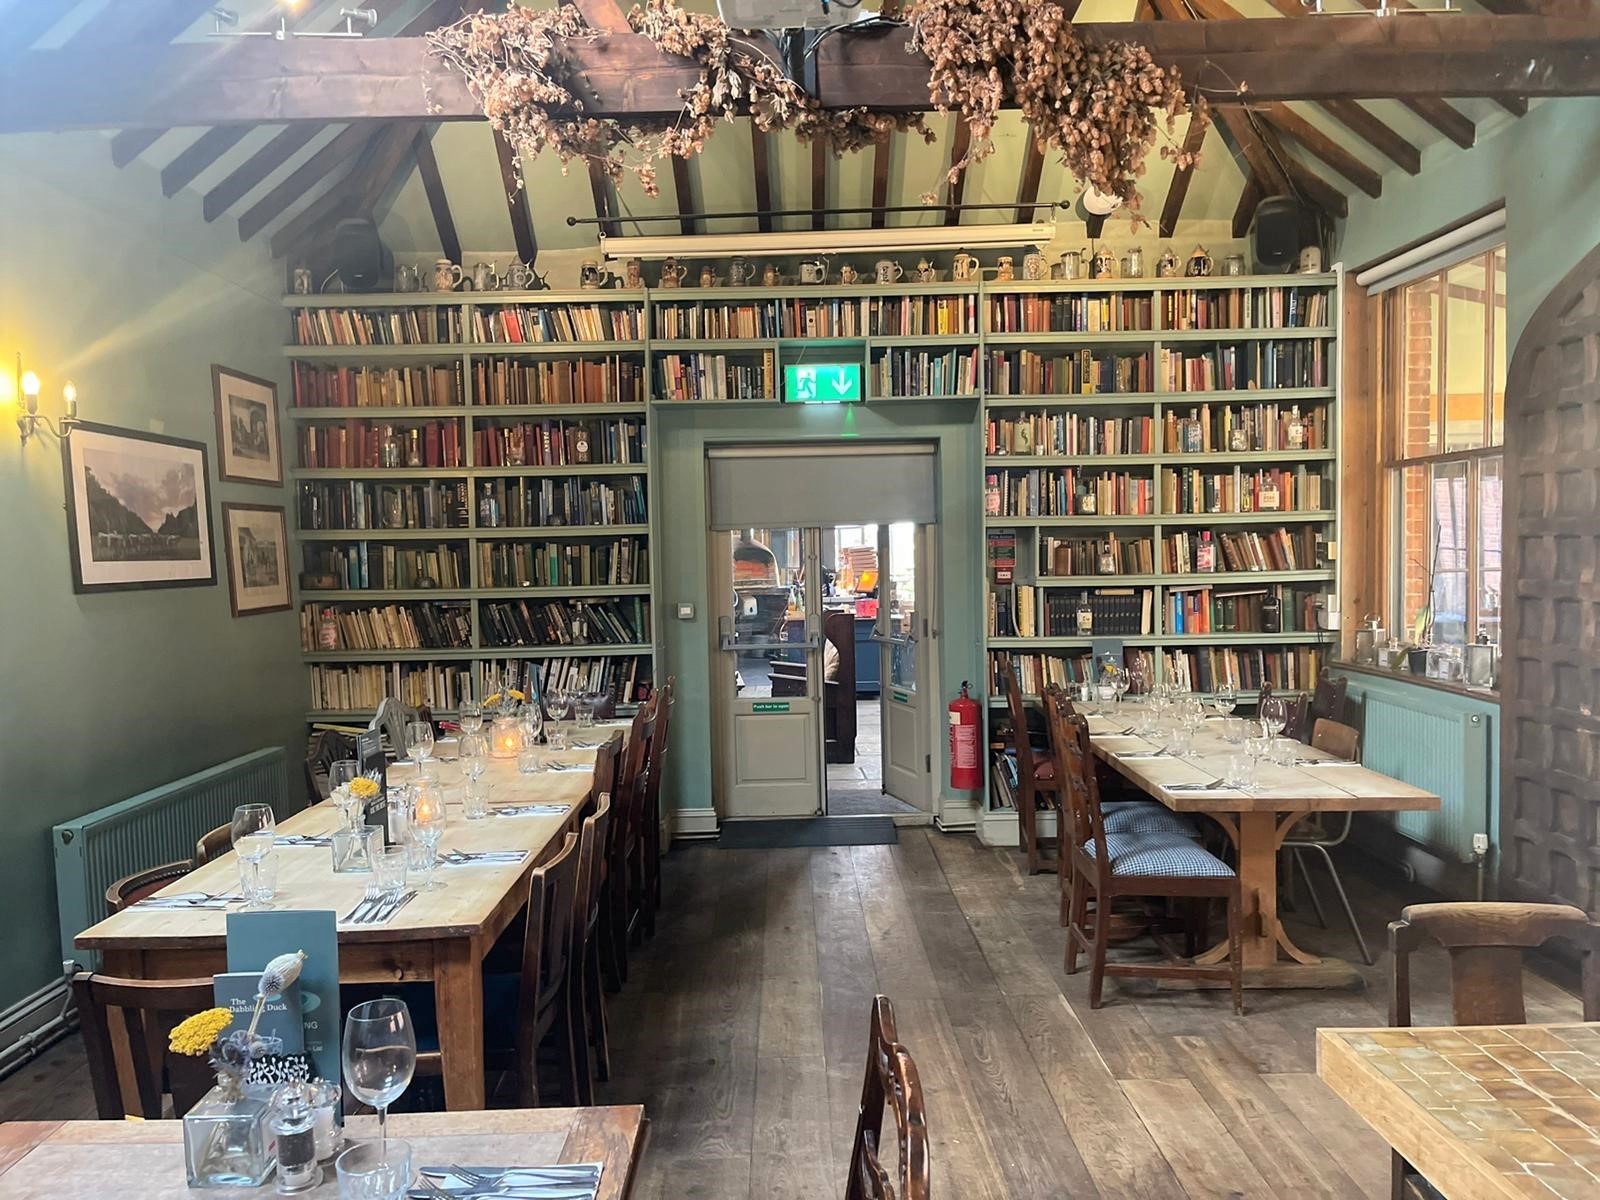 The interior of a restaurant with rustic decor, wooden dining table and chairs, there are wooden beams decorated in flowers and the back wall is lined with vintage books